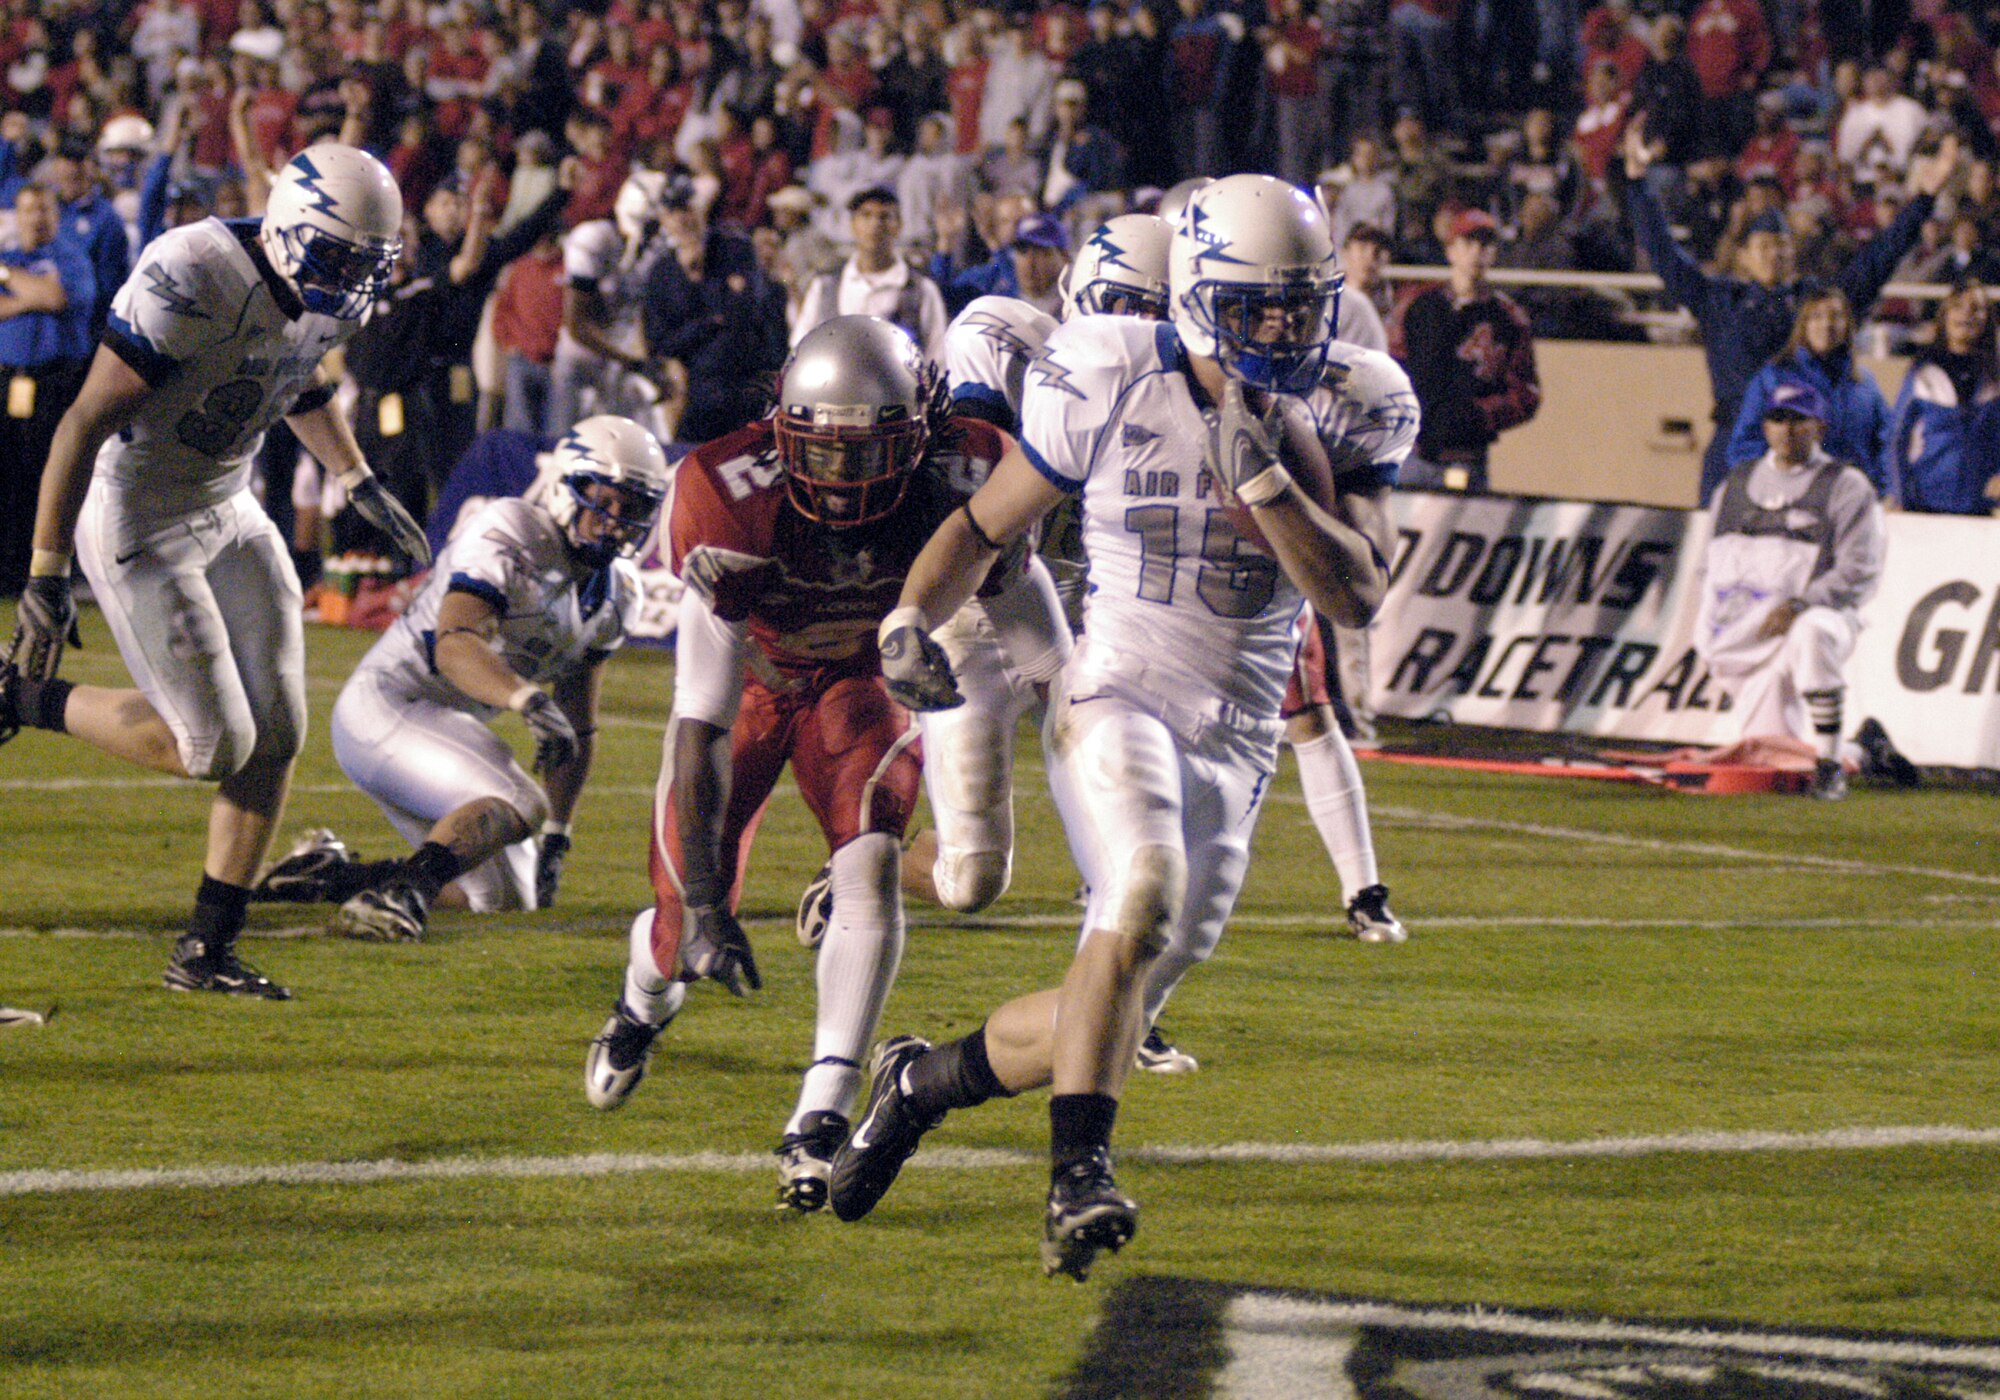 Falcon tailback Jim Ollis outruns New Mexico cornerback DeAndre Wright to the end zone during Air Force's 34-31 loss to the Lobos Oct. 25 at University Stadium in Albuquerque. Ollis' 8-yard touchdown gave his team a 31-28 lead after three quarters. (U.S. Air Force photo/John Van Winkle)  